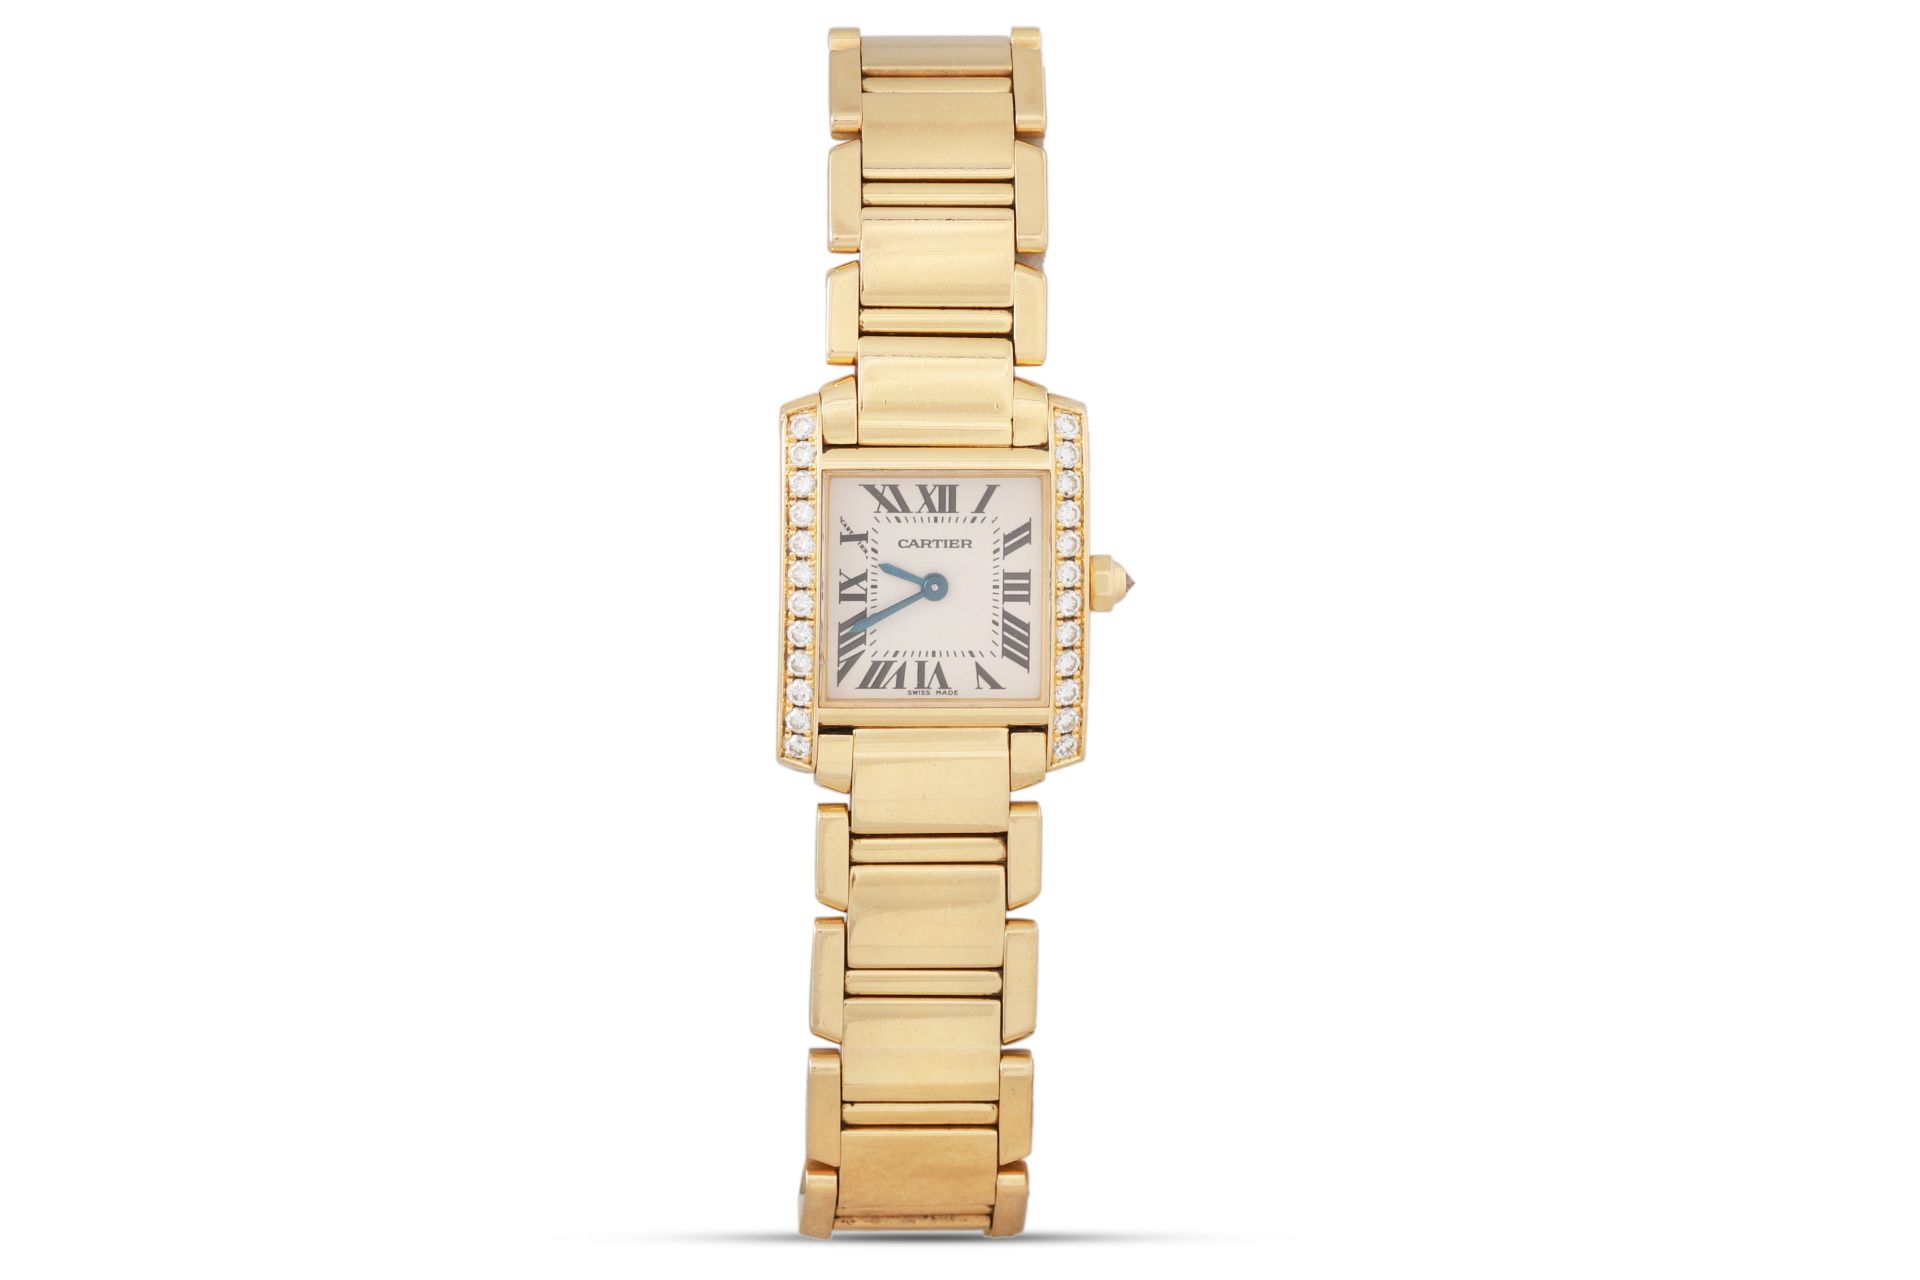 AN 18CT YELLOW GOLD DIAMOND SET LADY'S CARTIER WRISTWATCH, white face with Roman numerals, spare